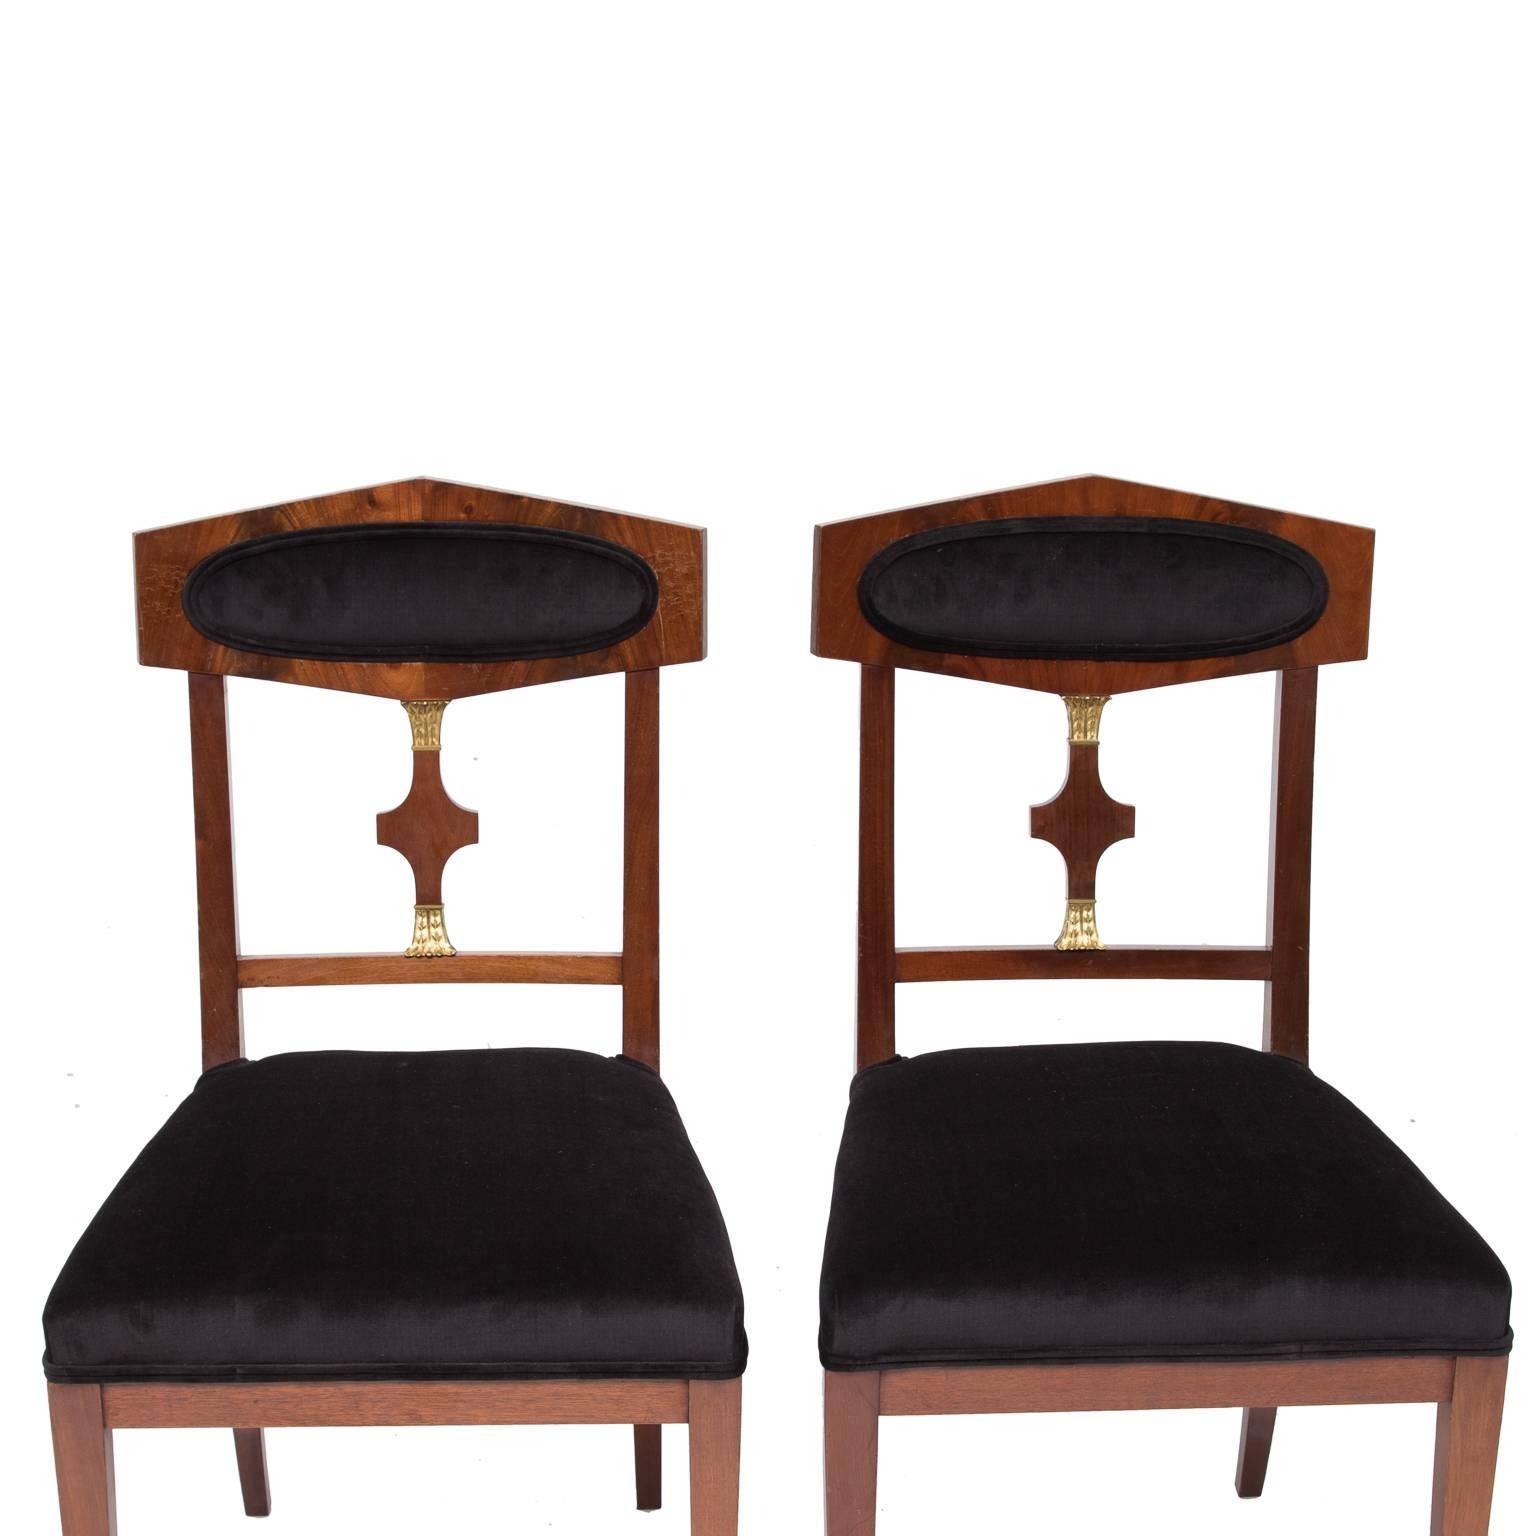 Vintage Swedish Empire Side Chairs 1